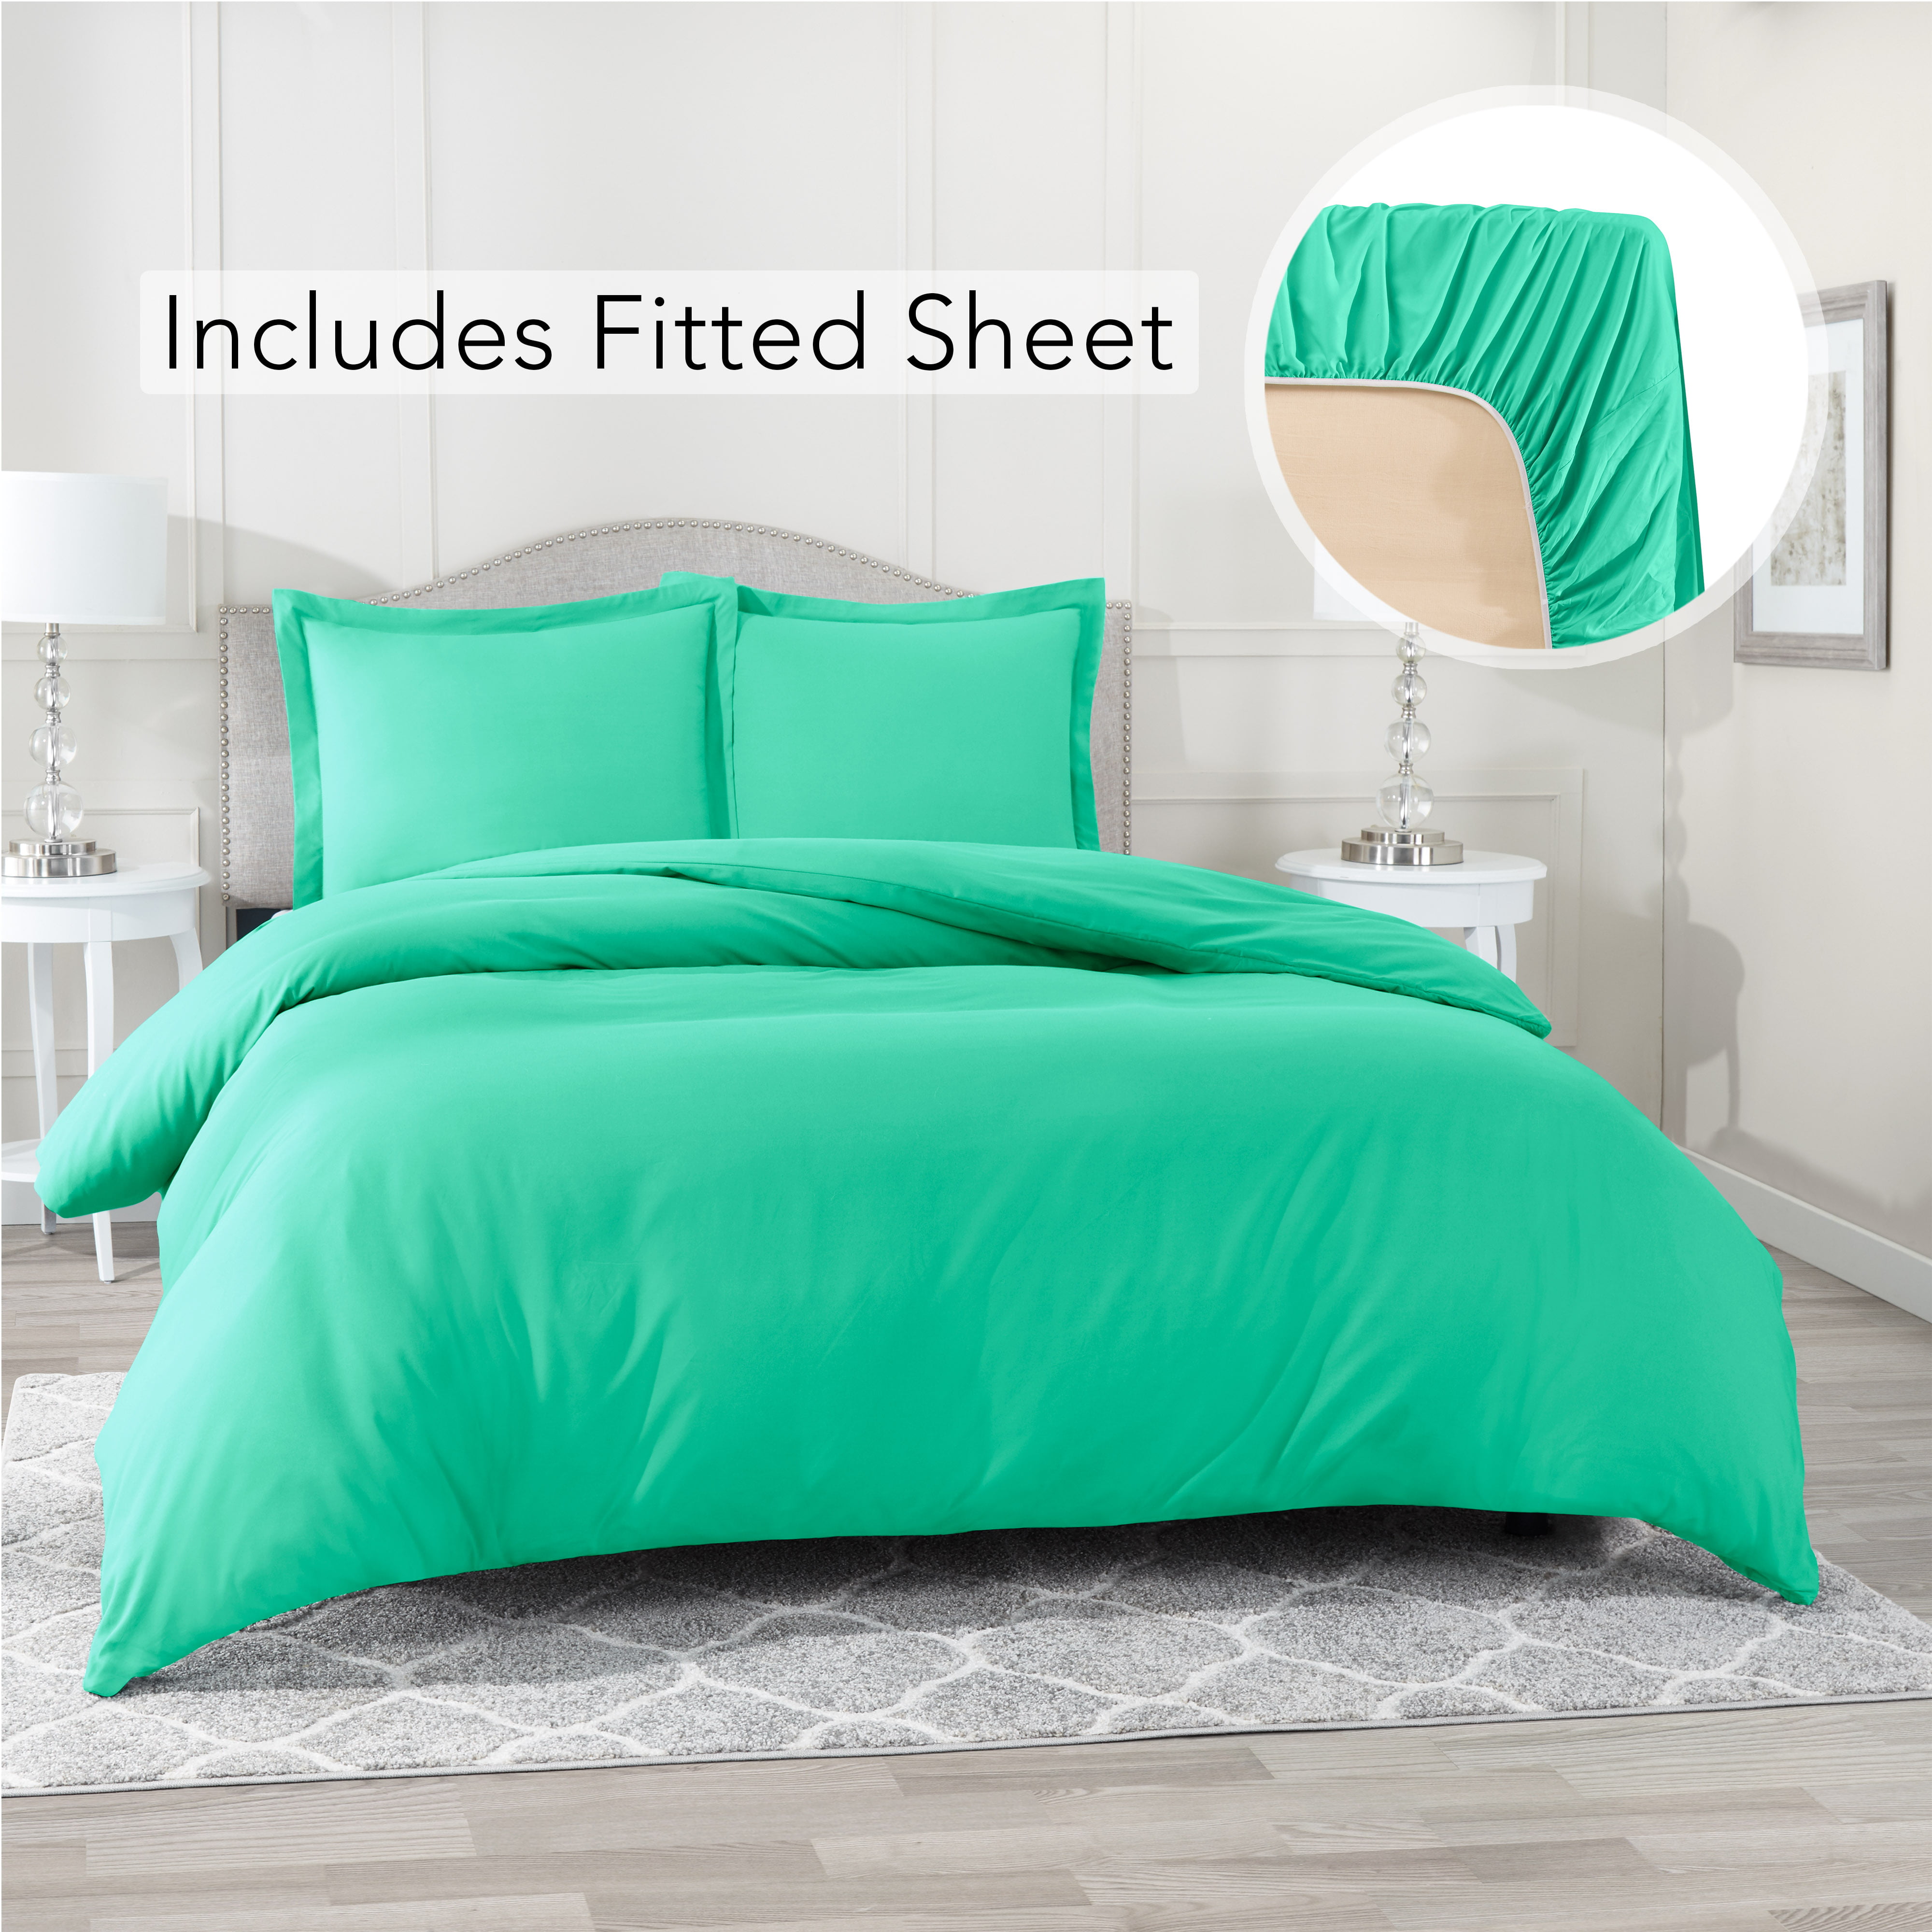 King Size Duvet Cover With 1 Fitted, Mint Green Duvet Cover